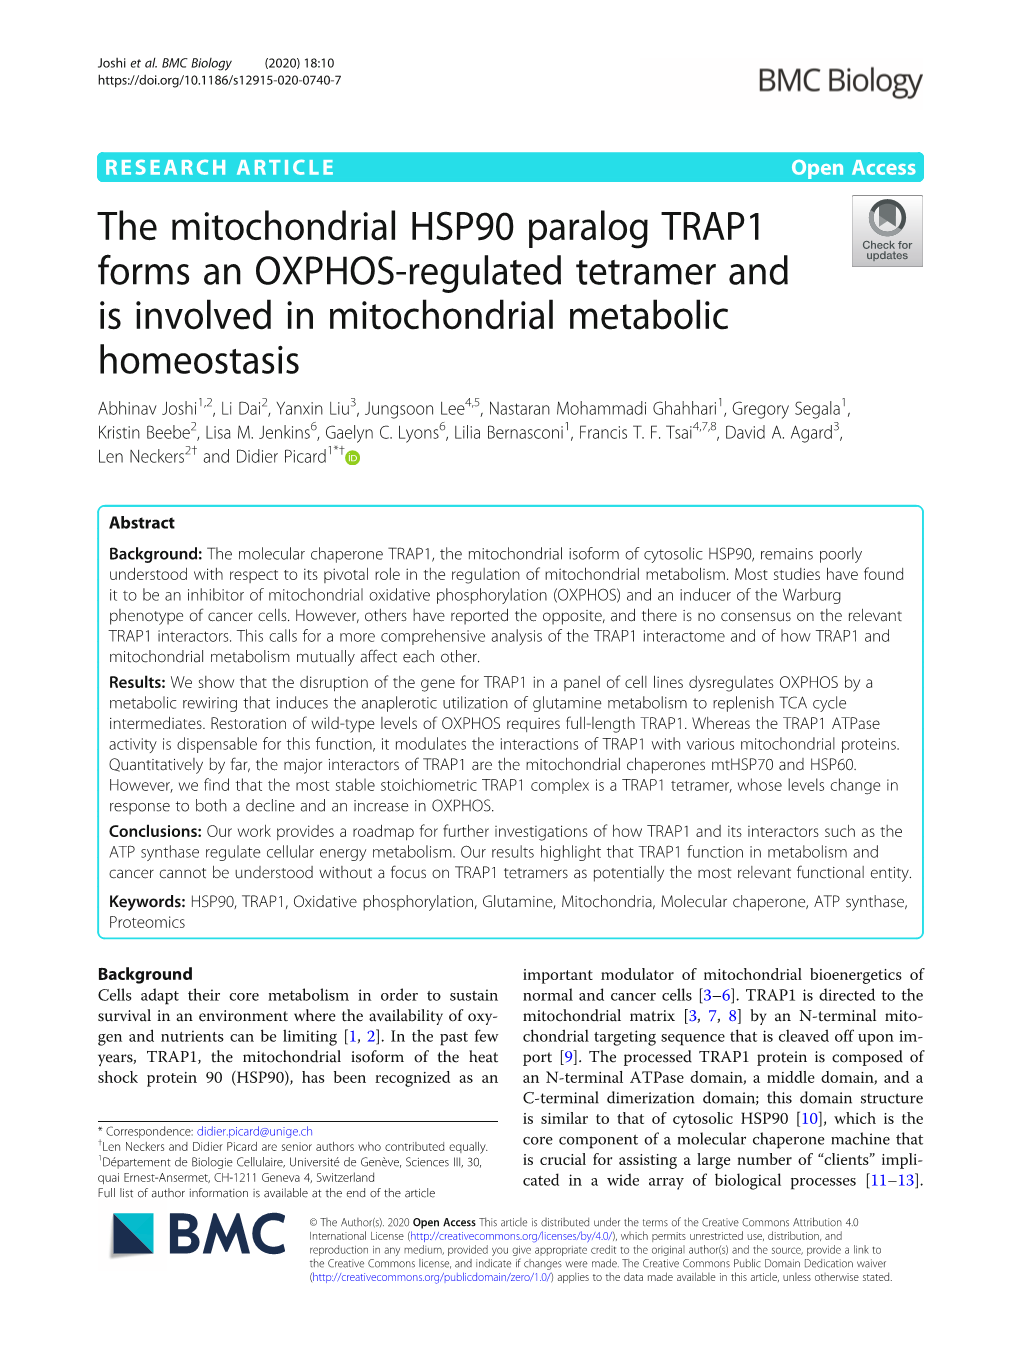 The Mitochondrial HSP90 Paralog TRAP1 Forms an OXPHOS